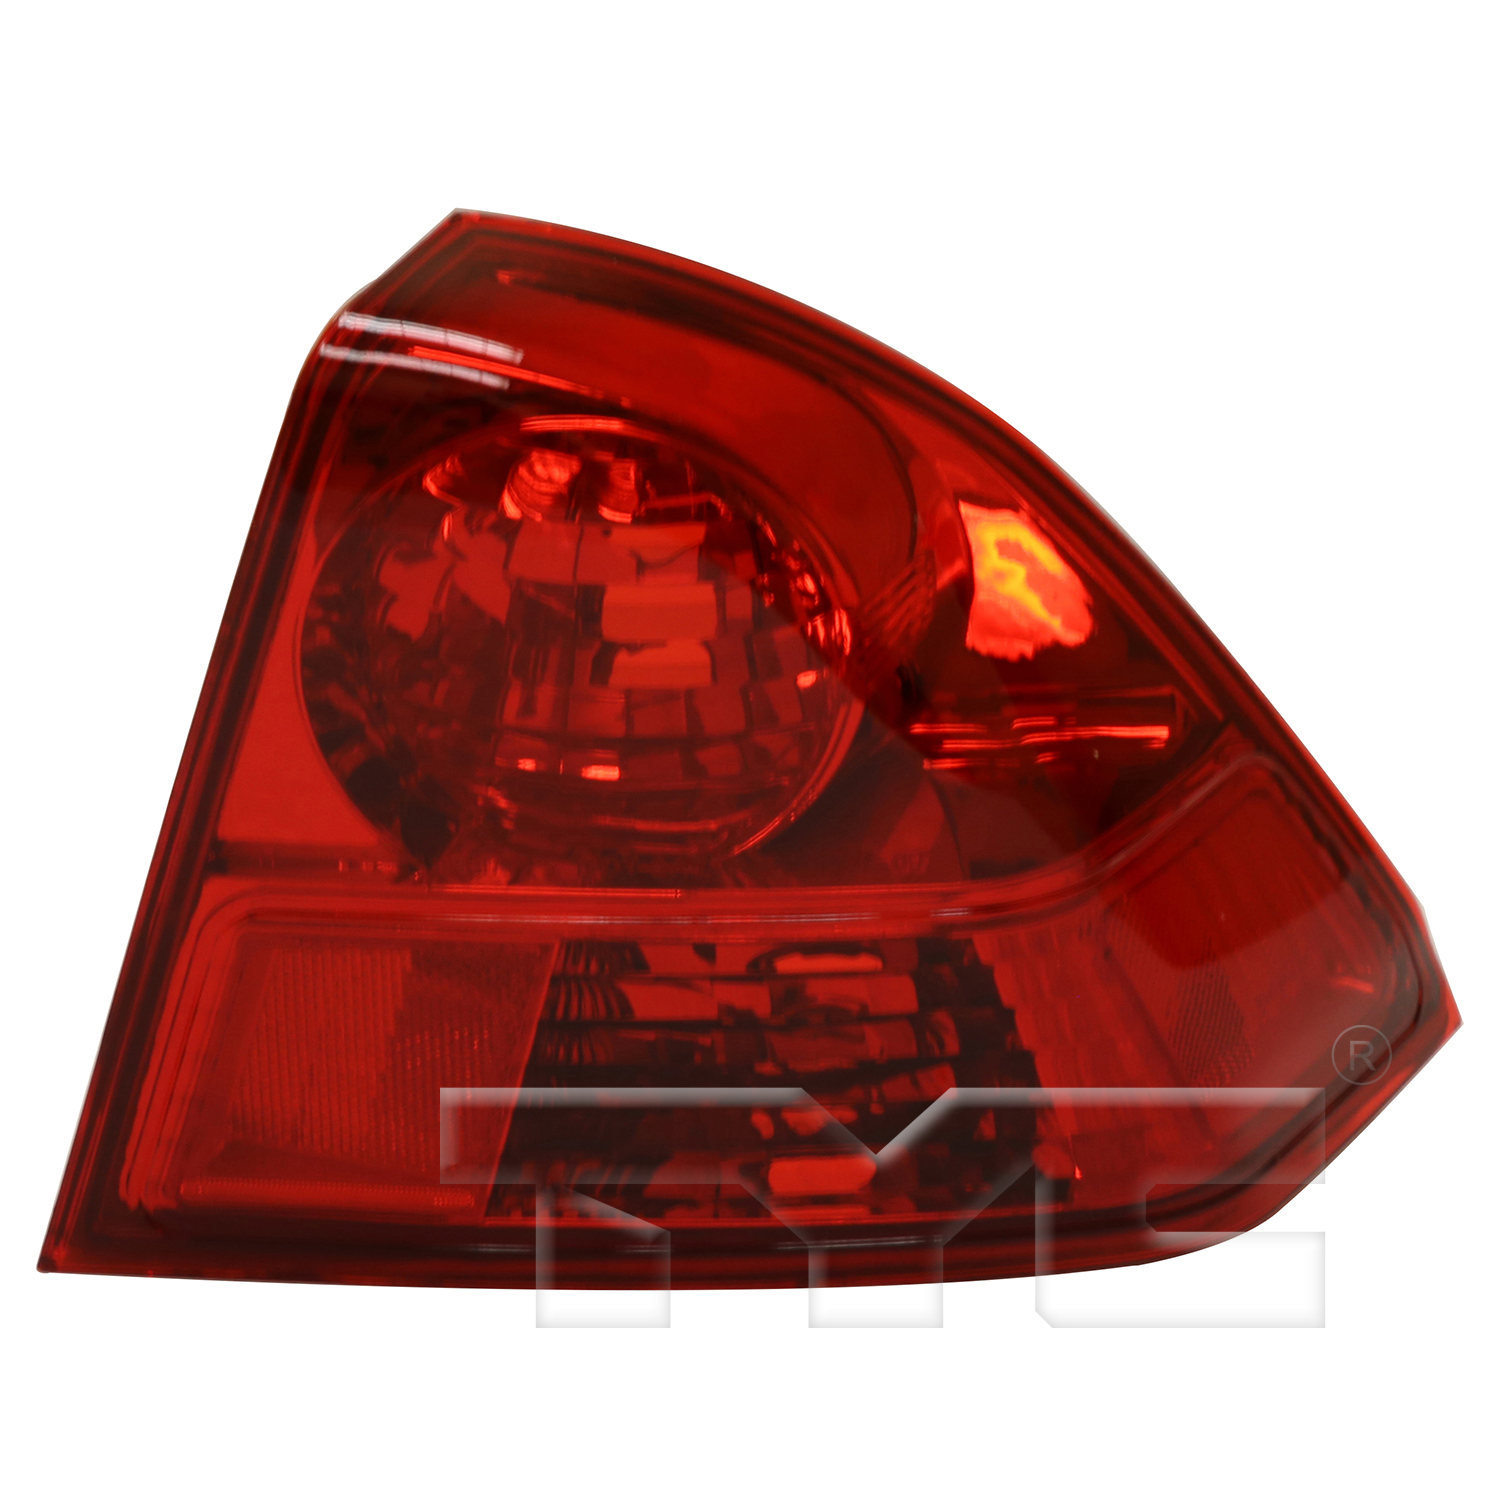 Aftermarket TAILLIGHTS for HONDA - CIVIC, CIVIC,03-05,RT Taillamp assy